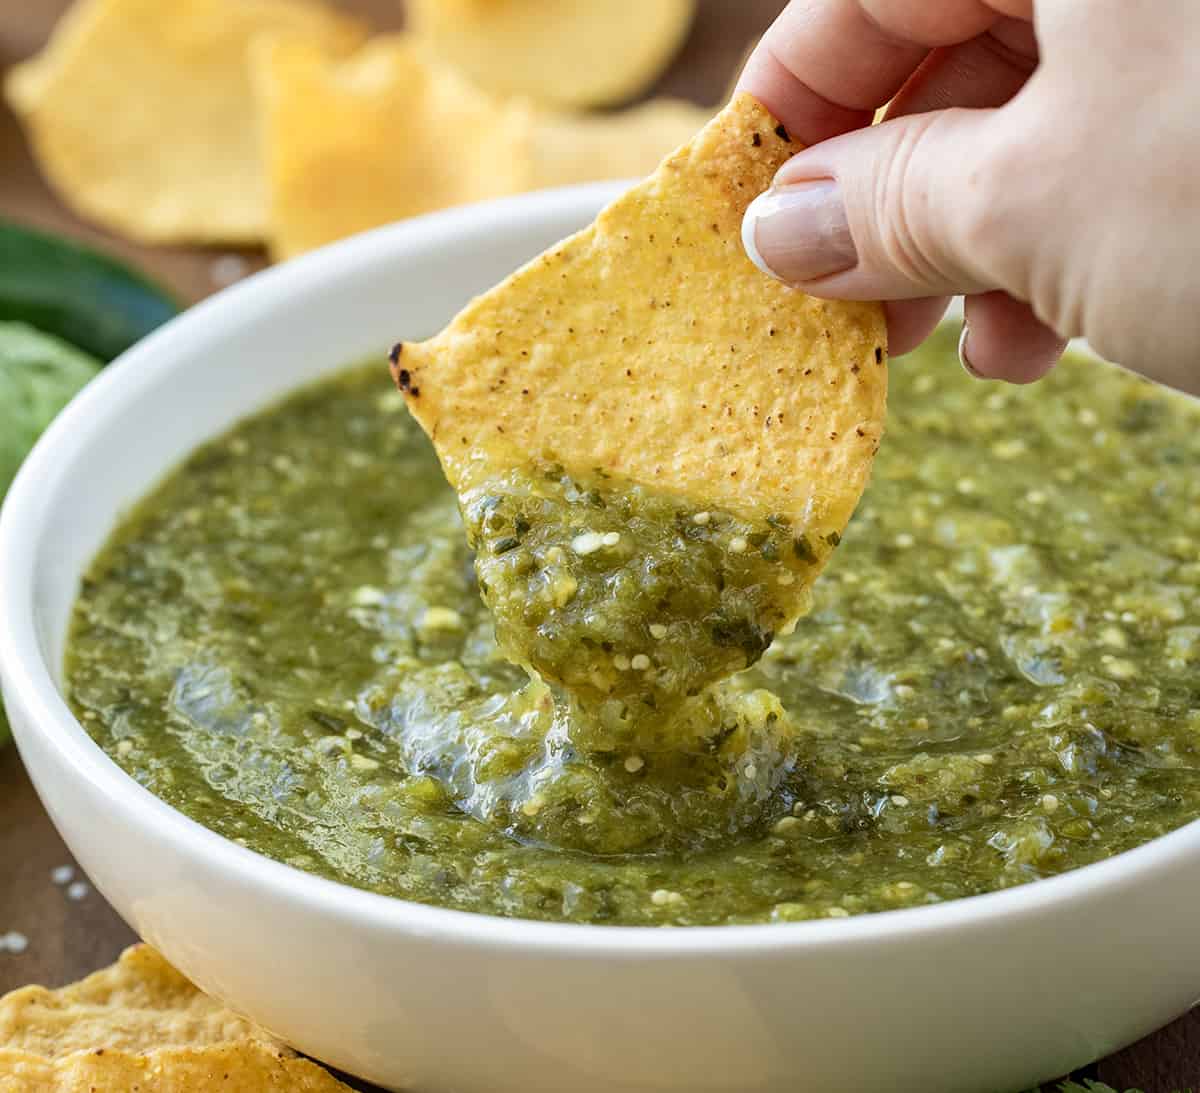 Dipping a chip into Salsa Verde.